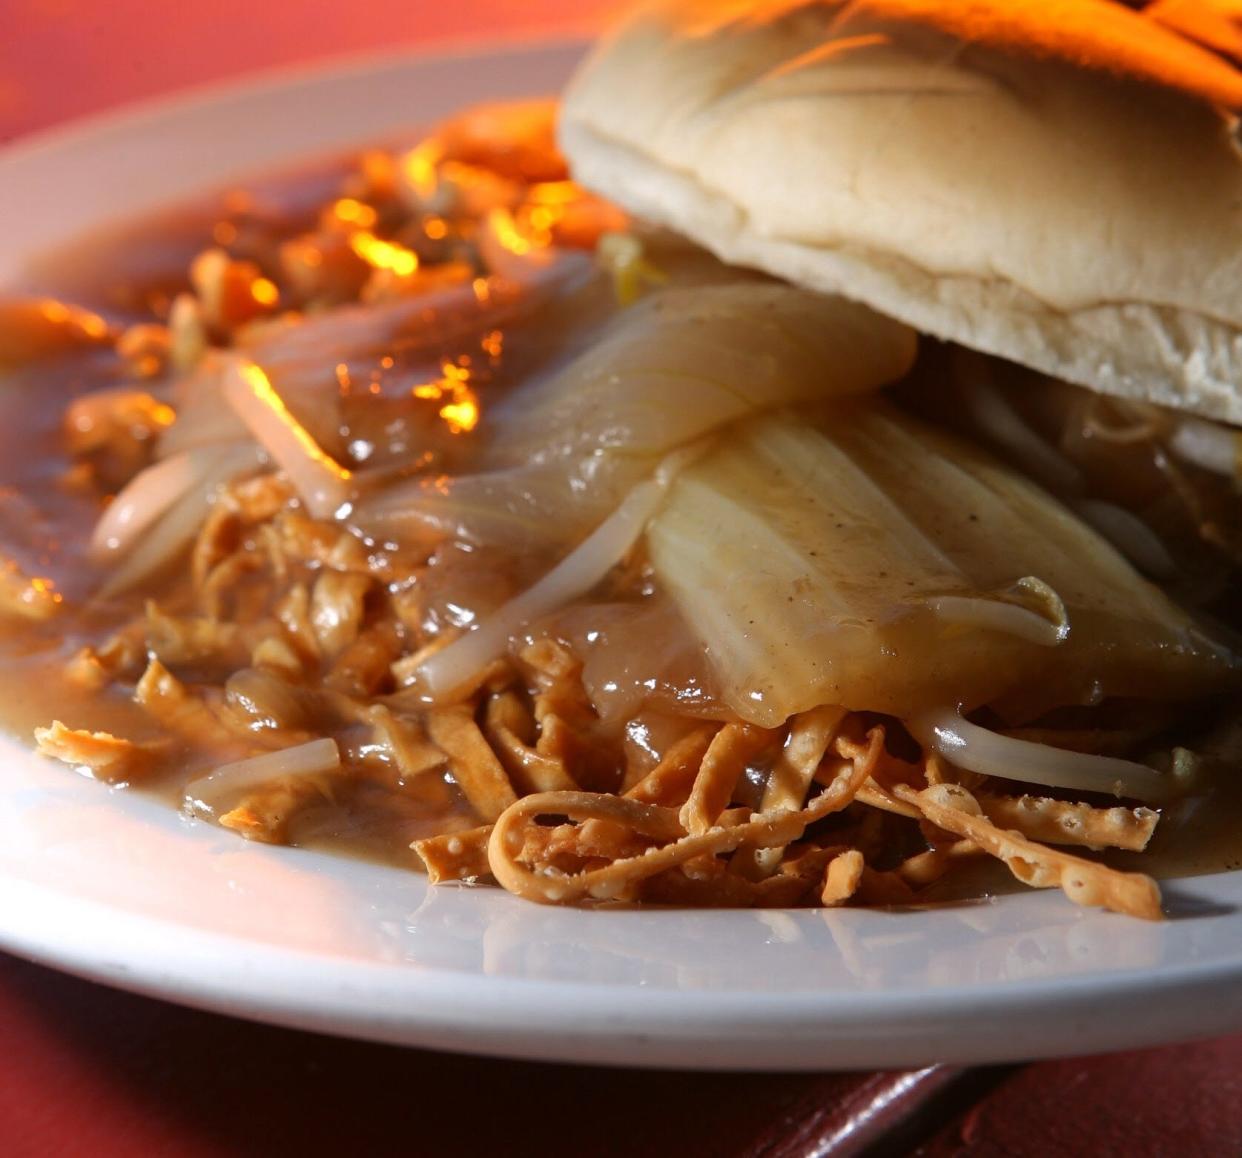 Rhode Island and Southeastern Massachusetts are home to the unique Chow Mein Sandwich. Find yours at Evelyn's Drive-in in Tiverton.